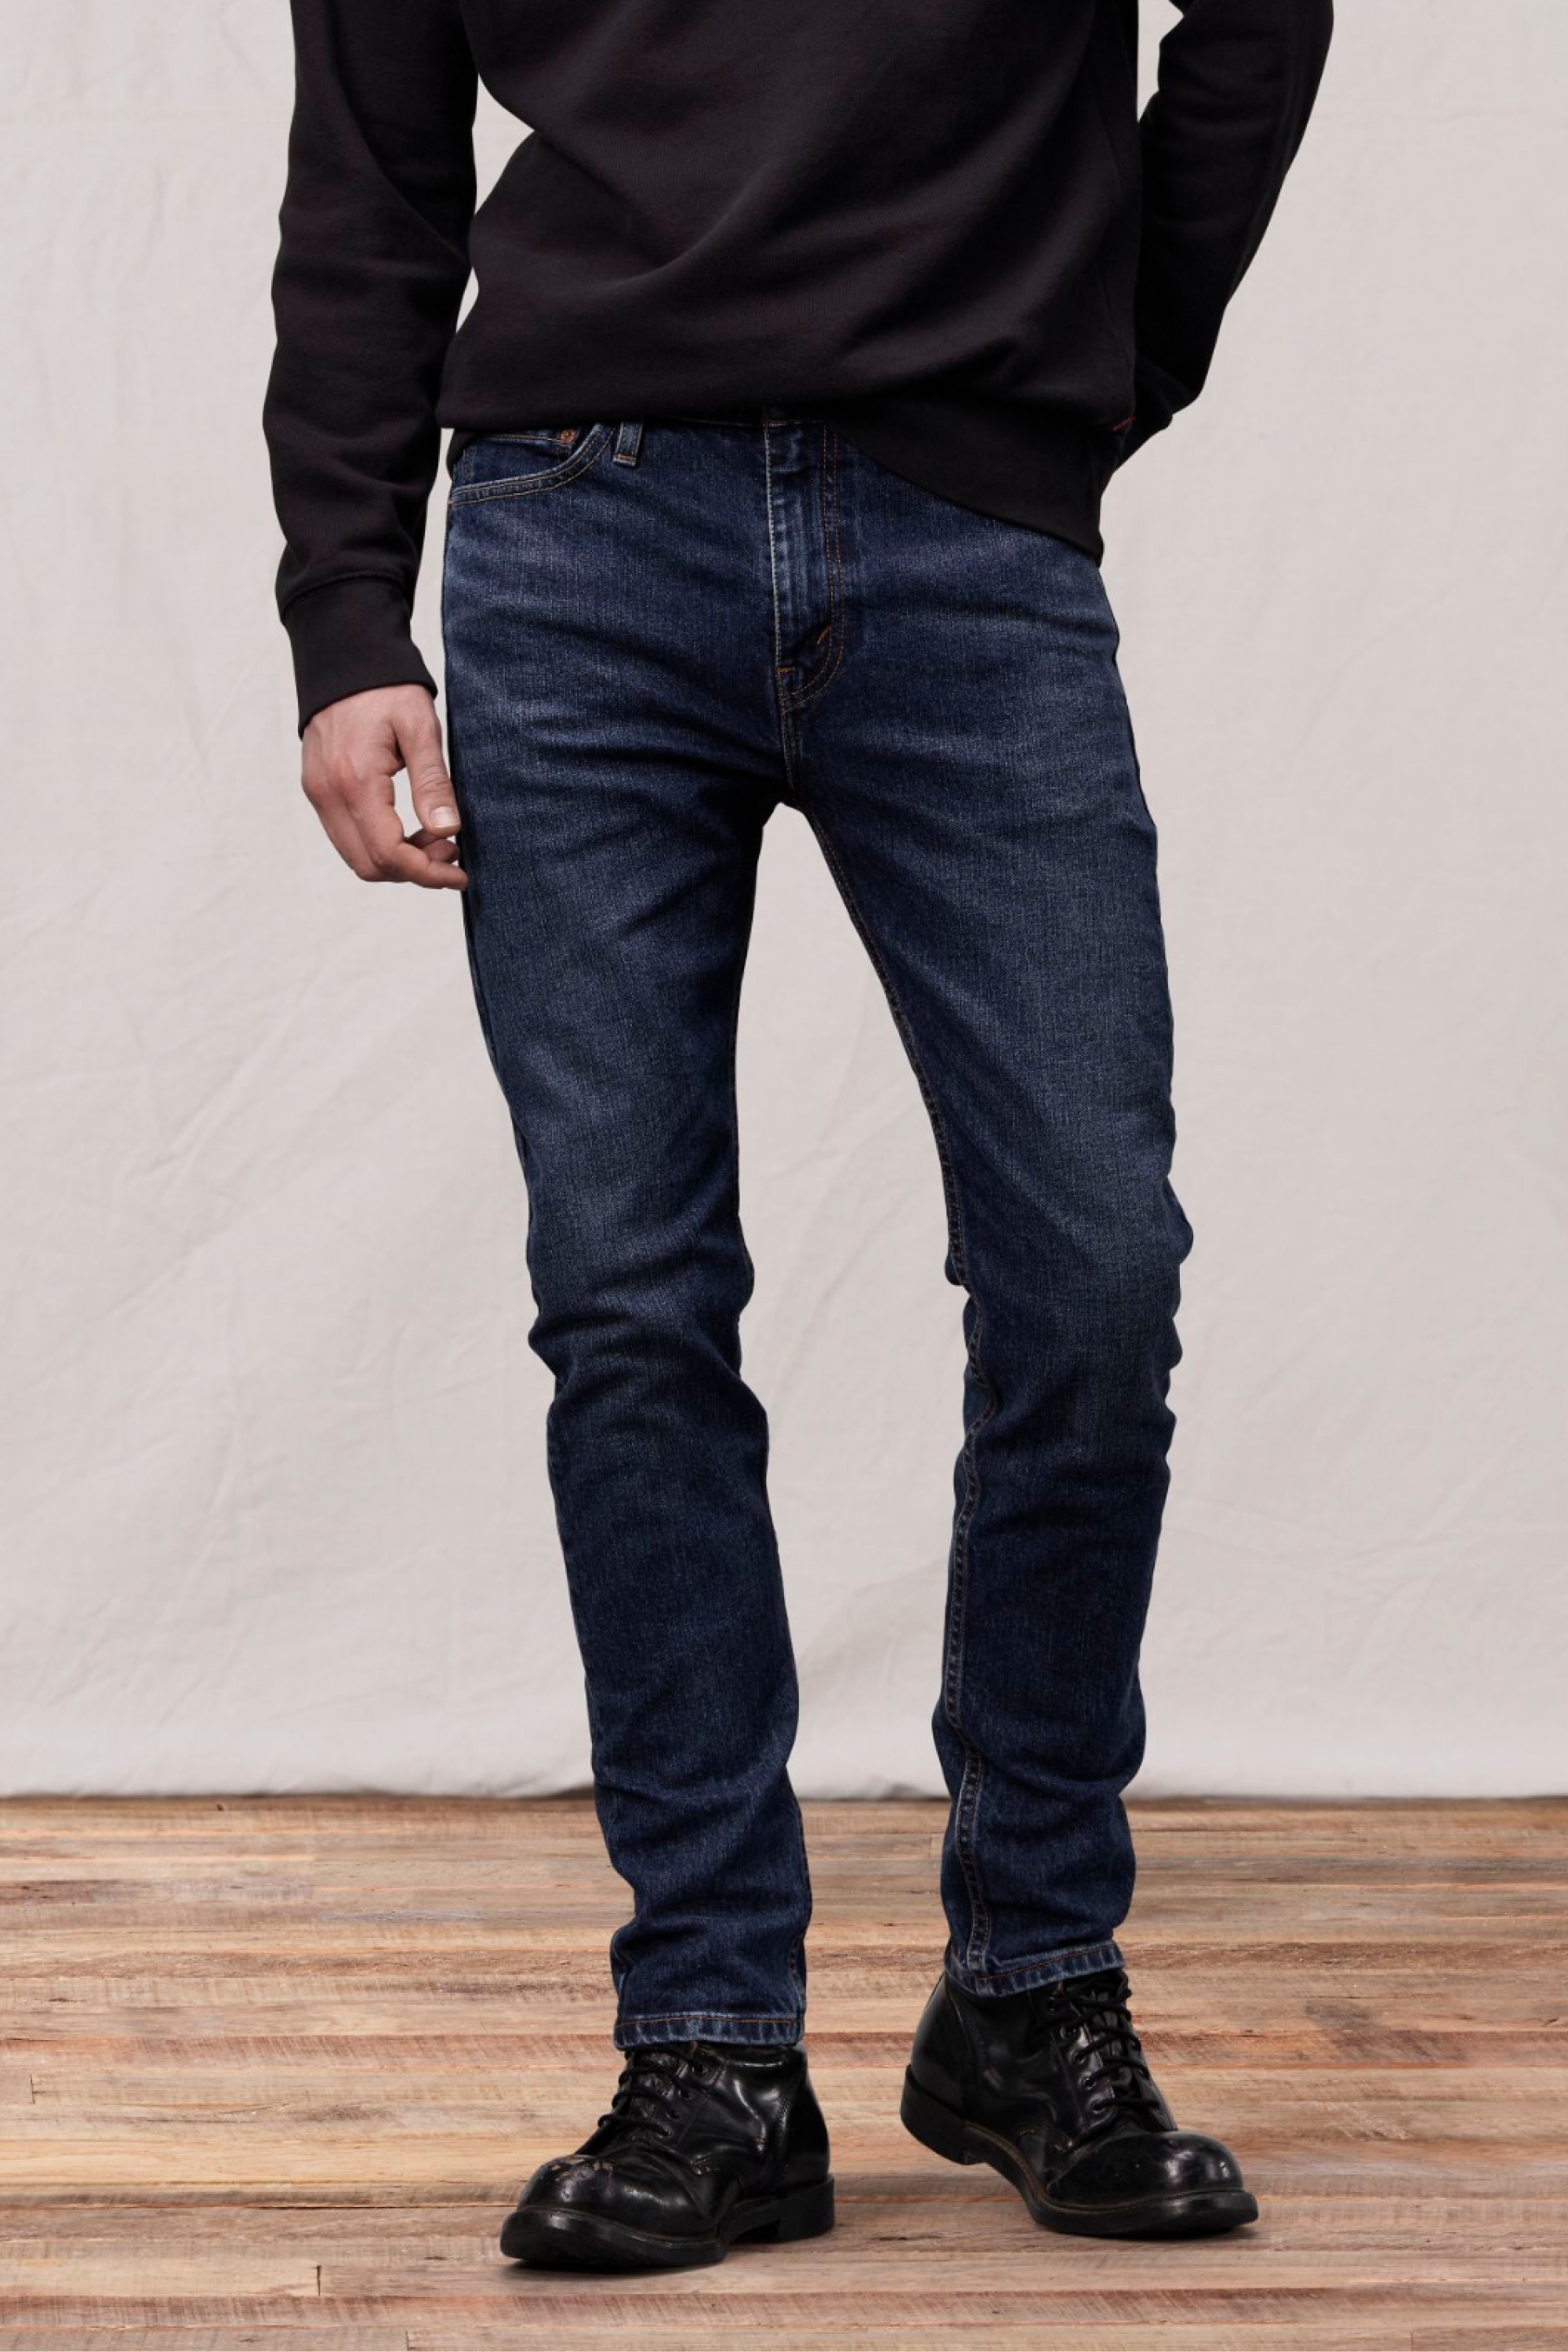 levi jeans style guide